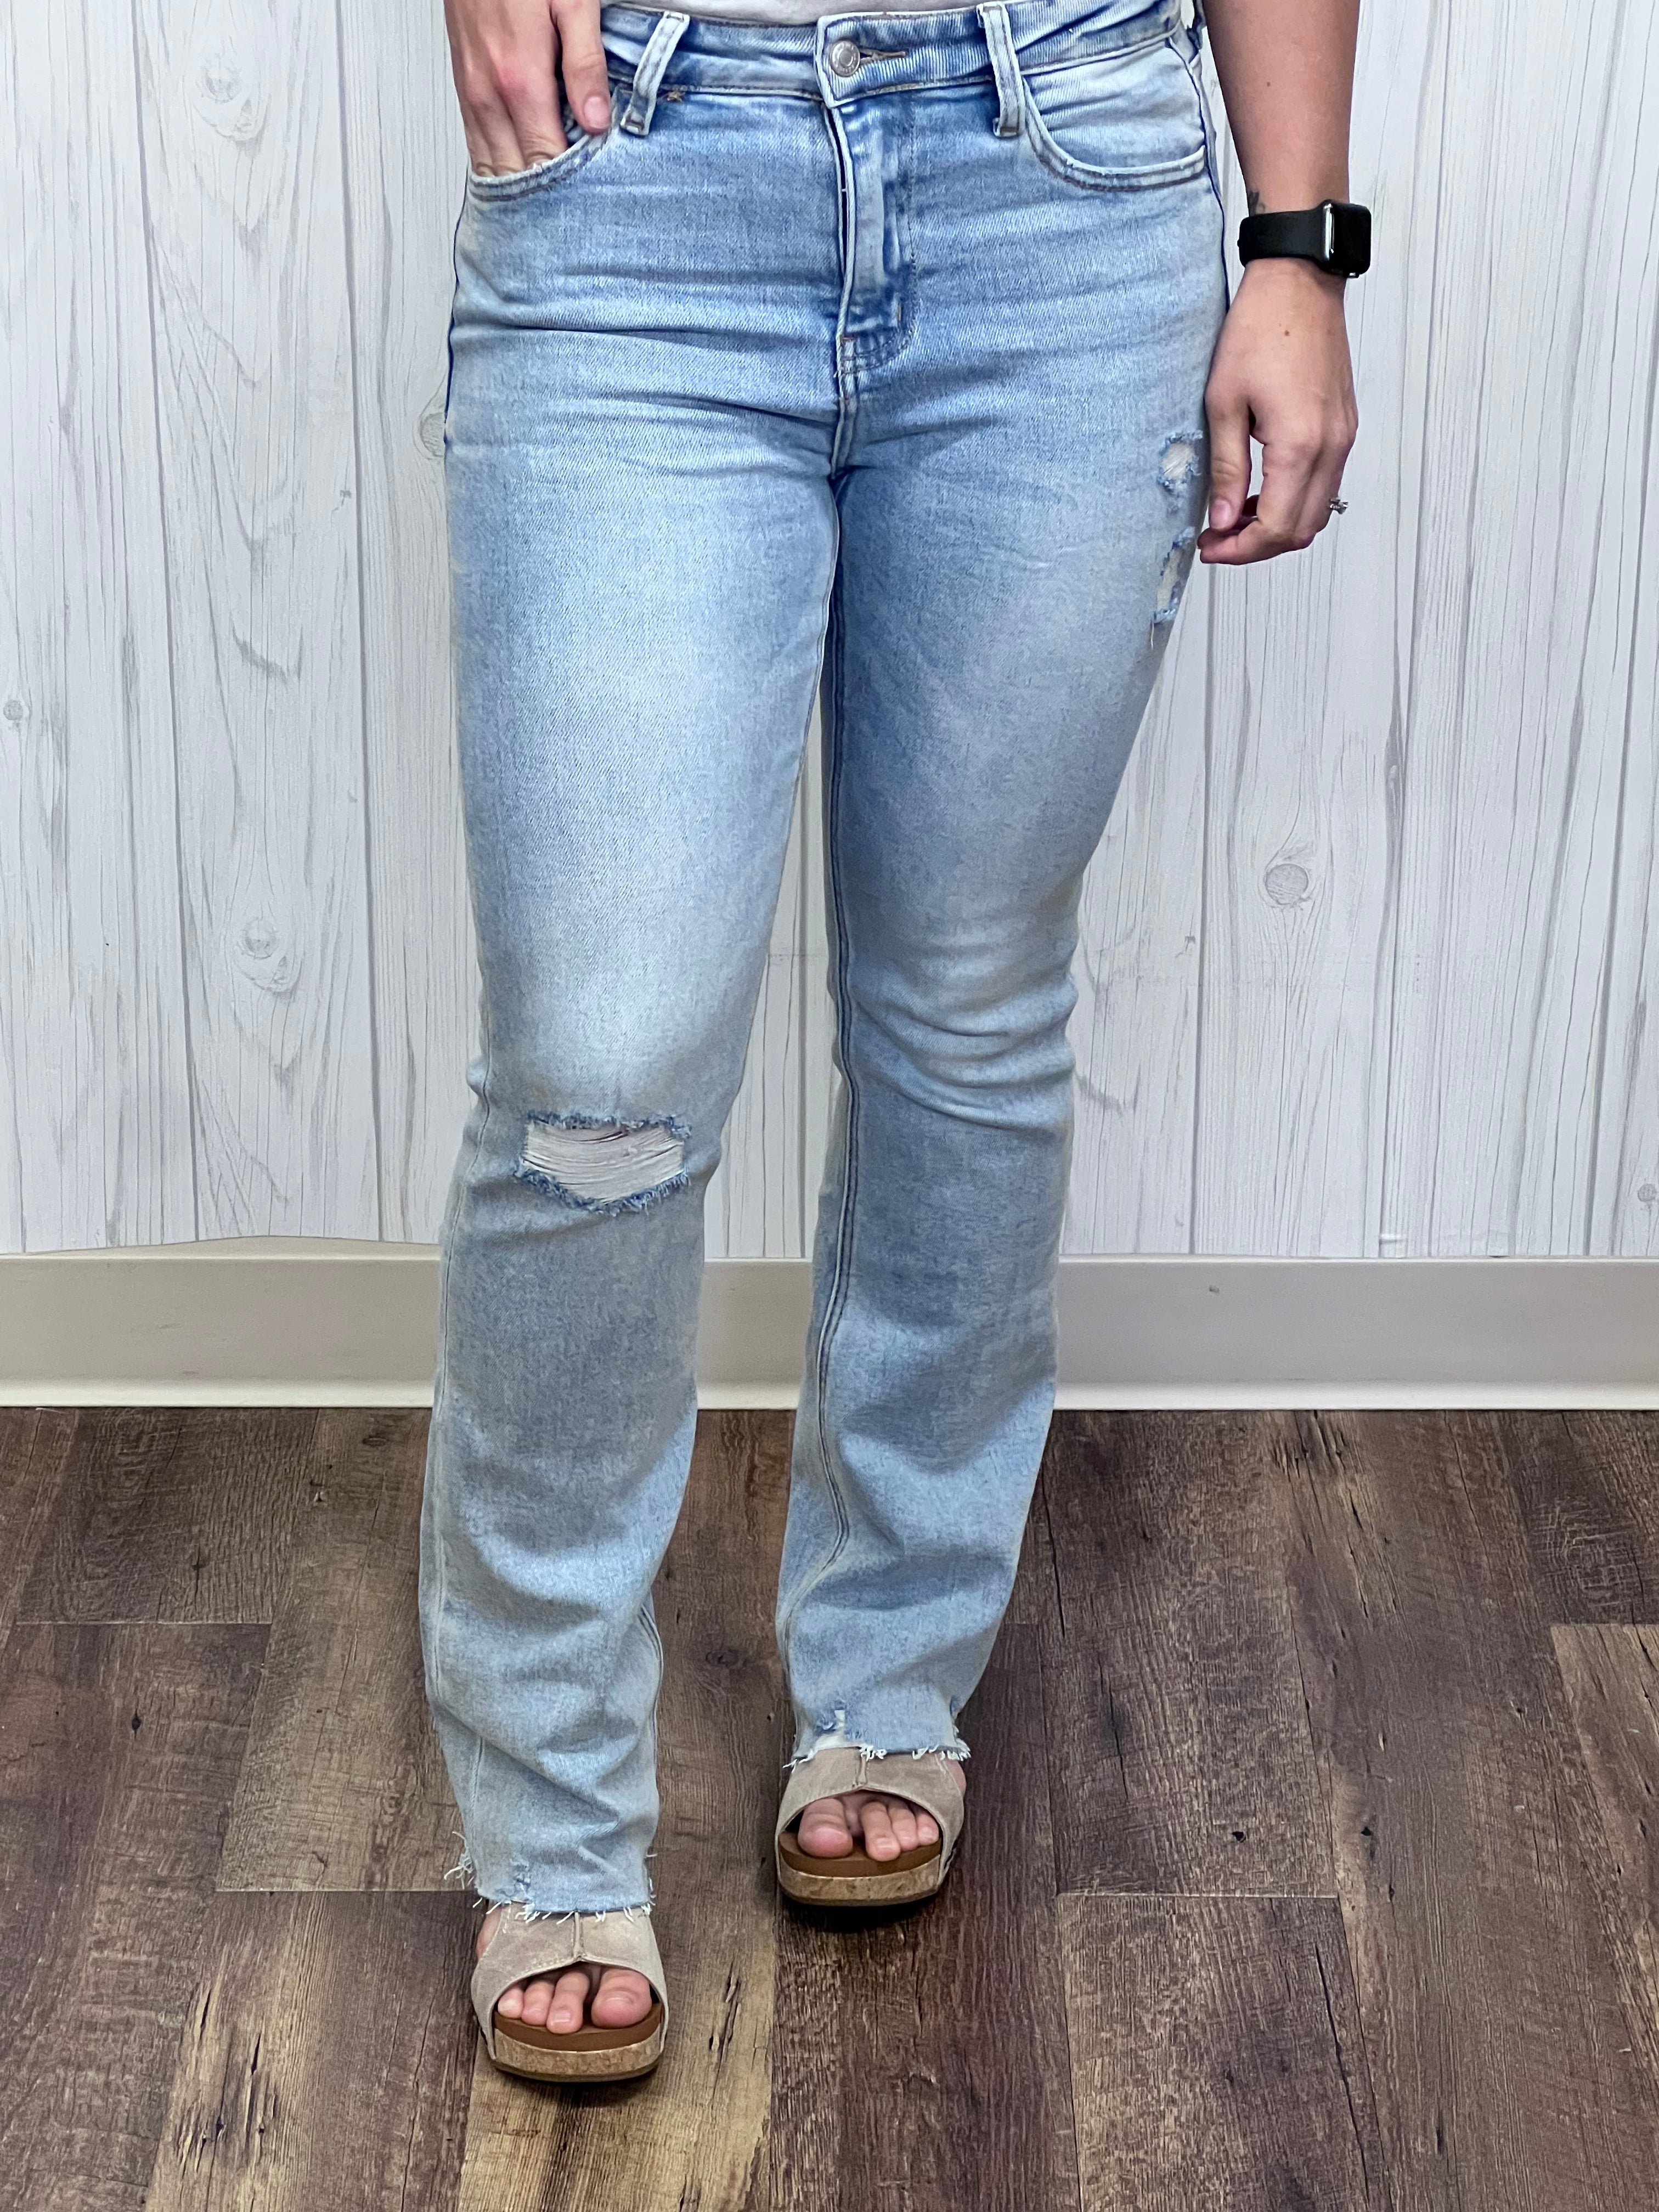 Main Squeeze Bootcut Jeans By Lovervet FINAL SALE